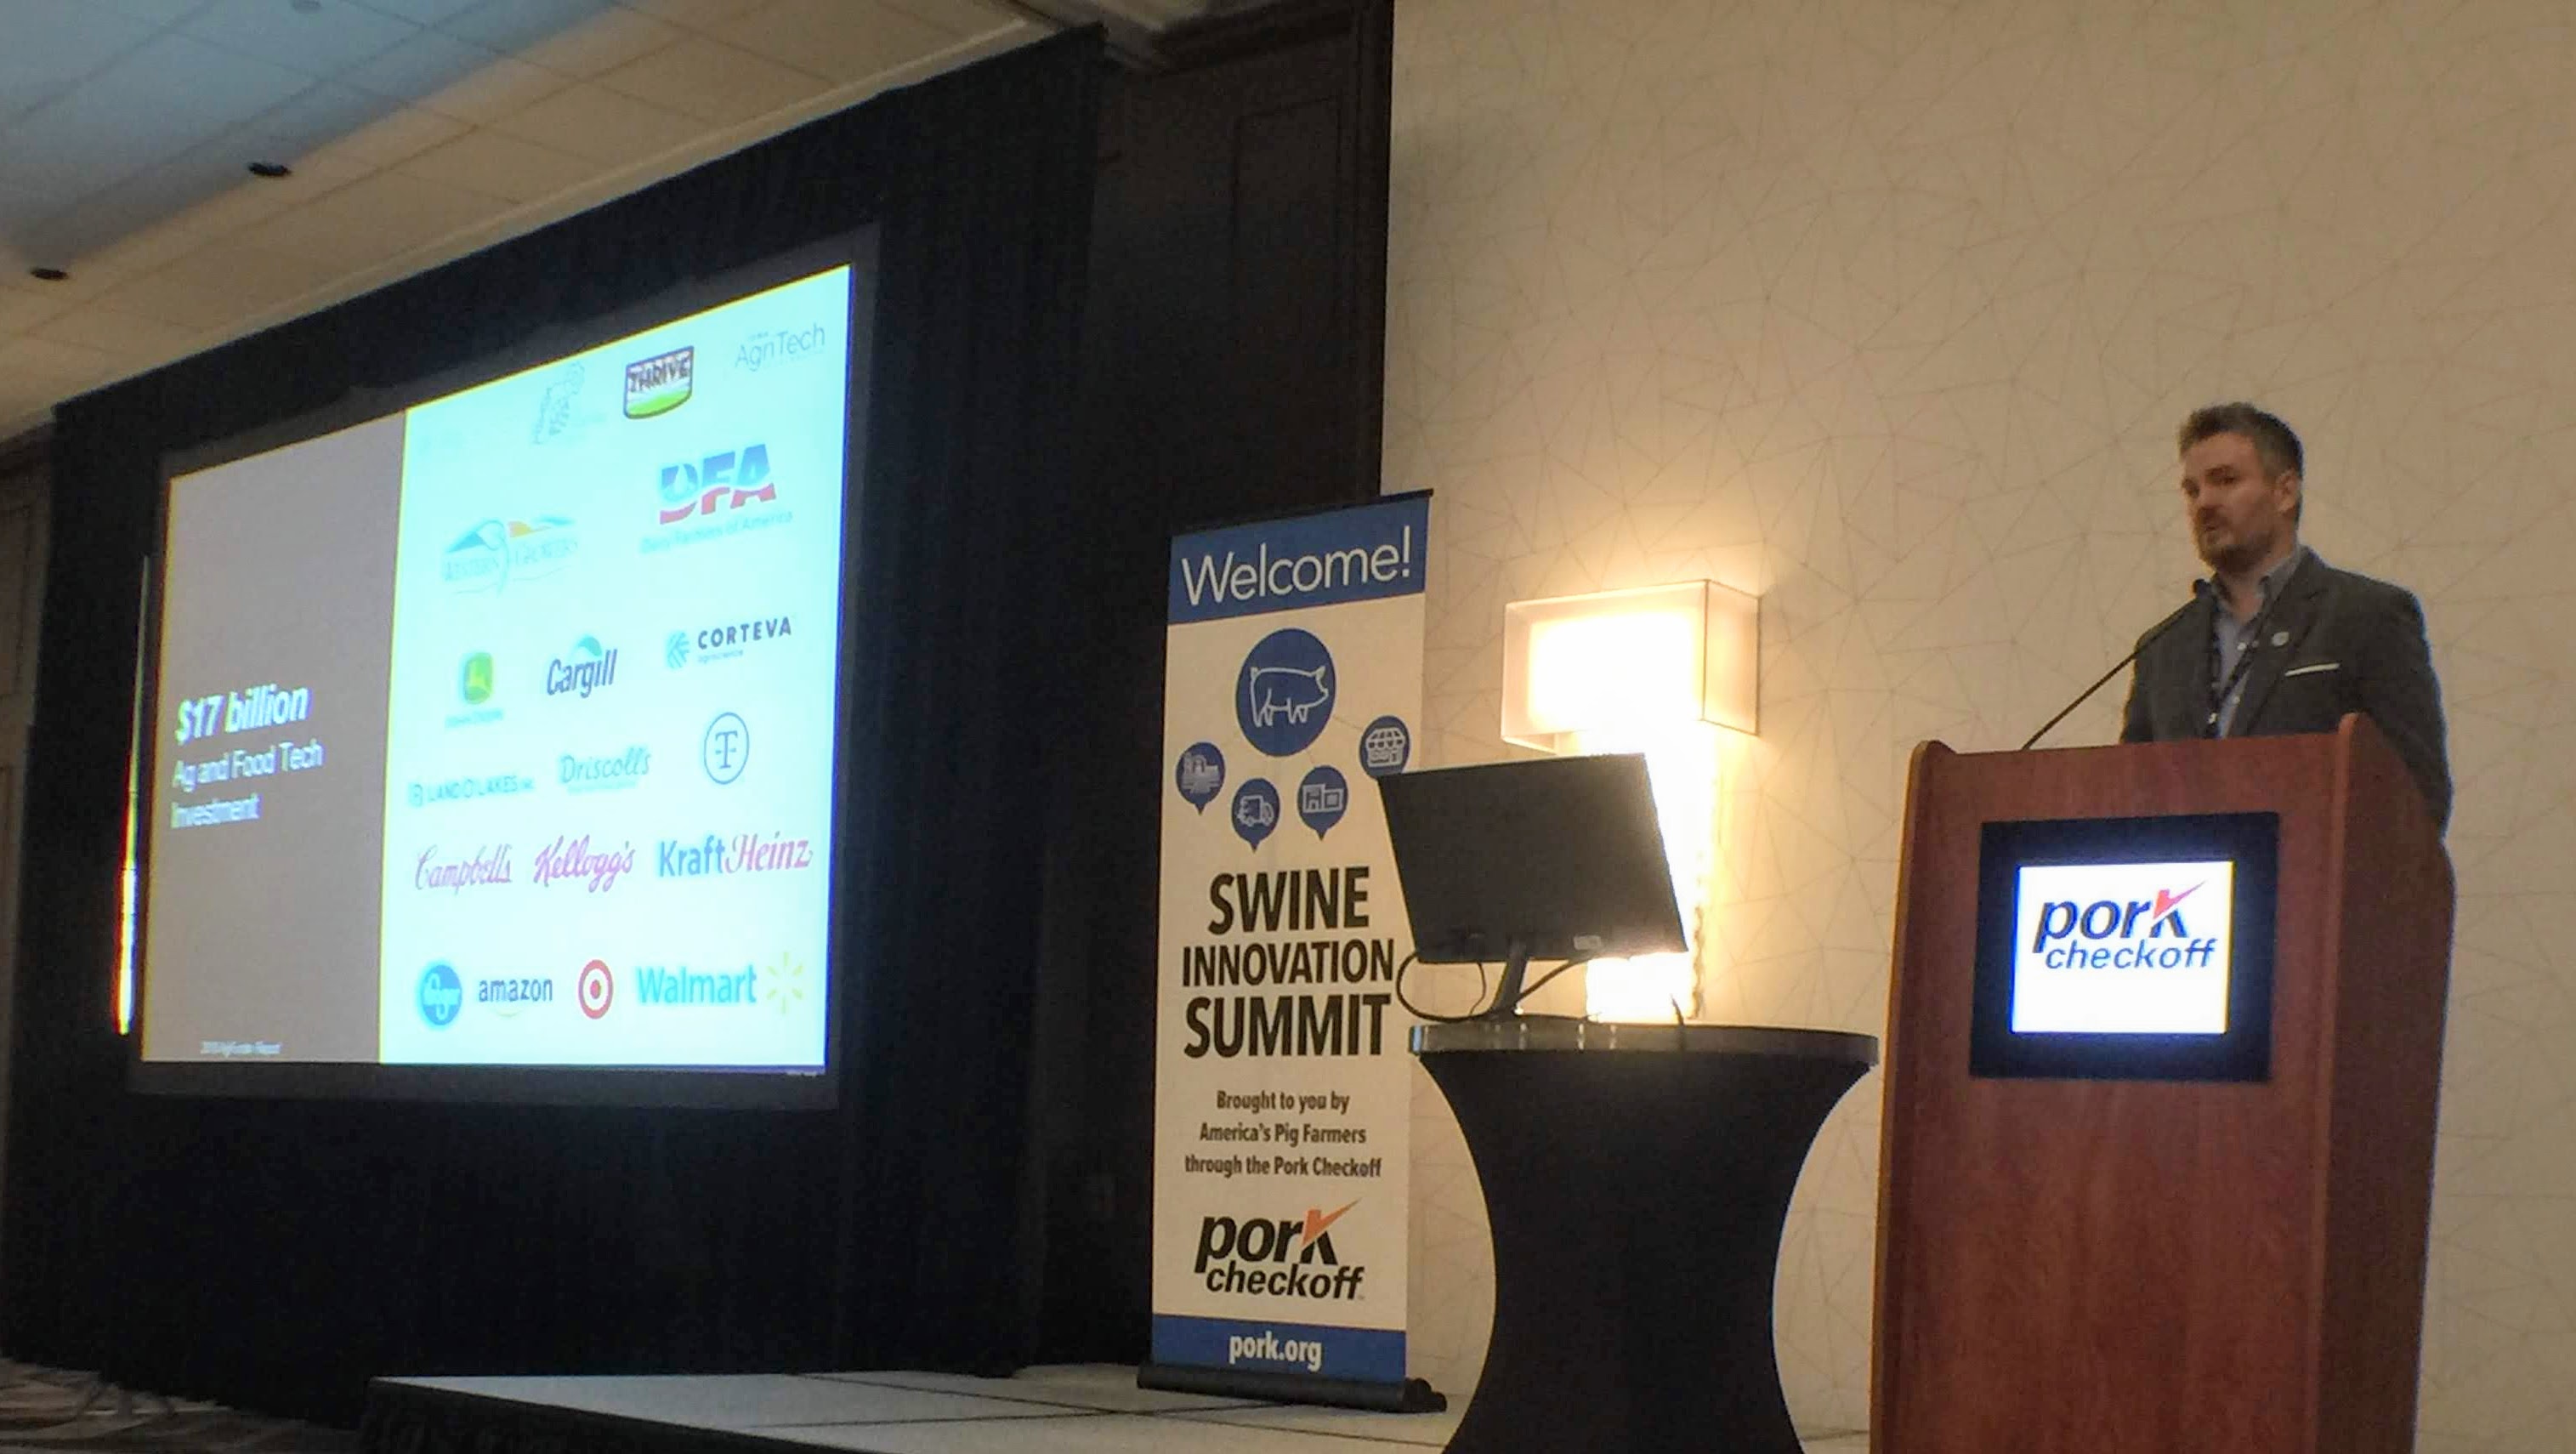 Swine Innovation Summit held in Indianapolis, IN, USA